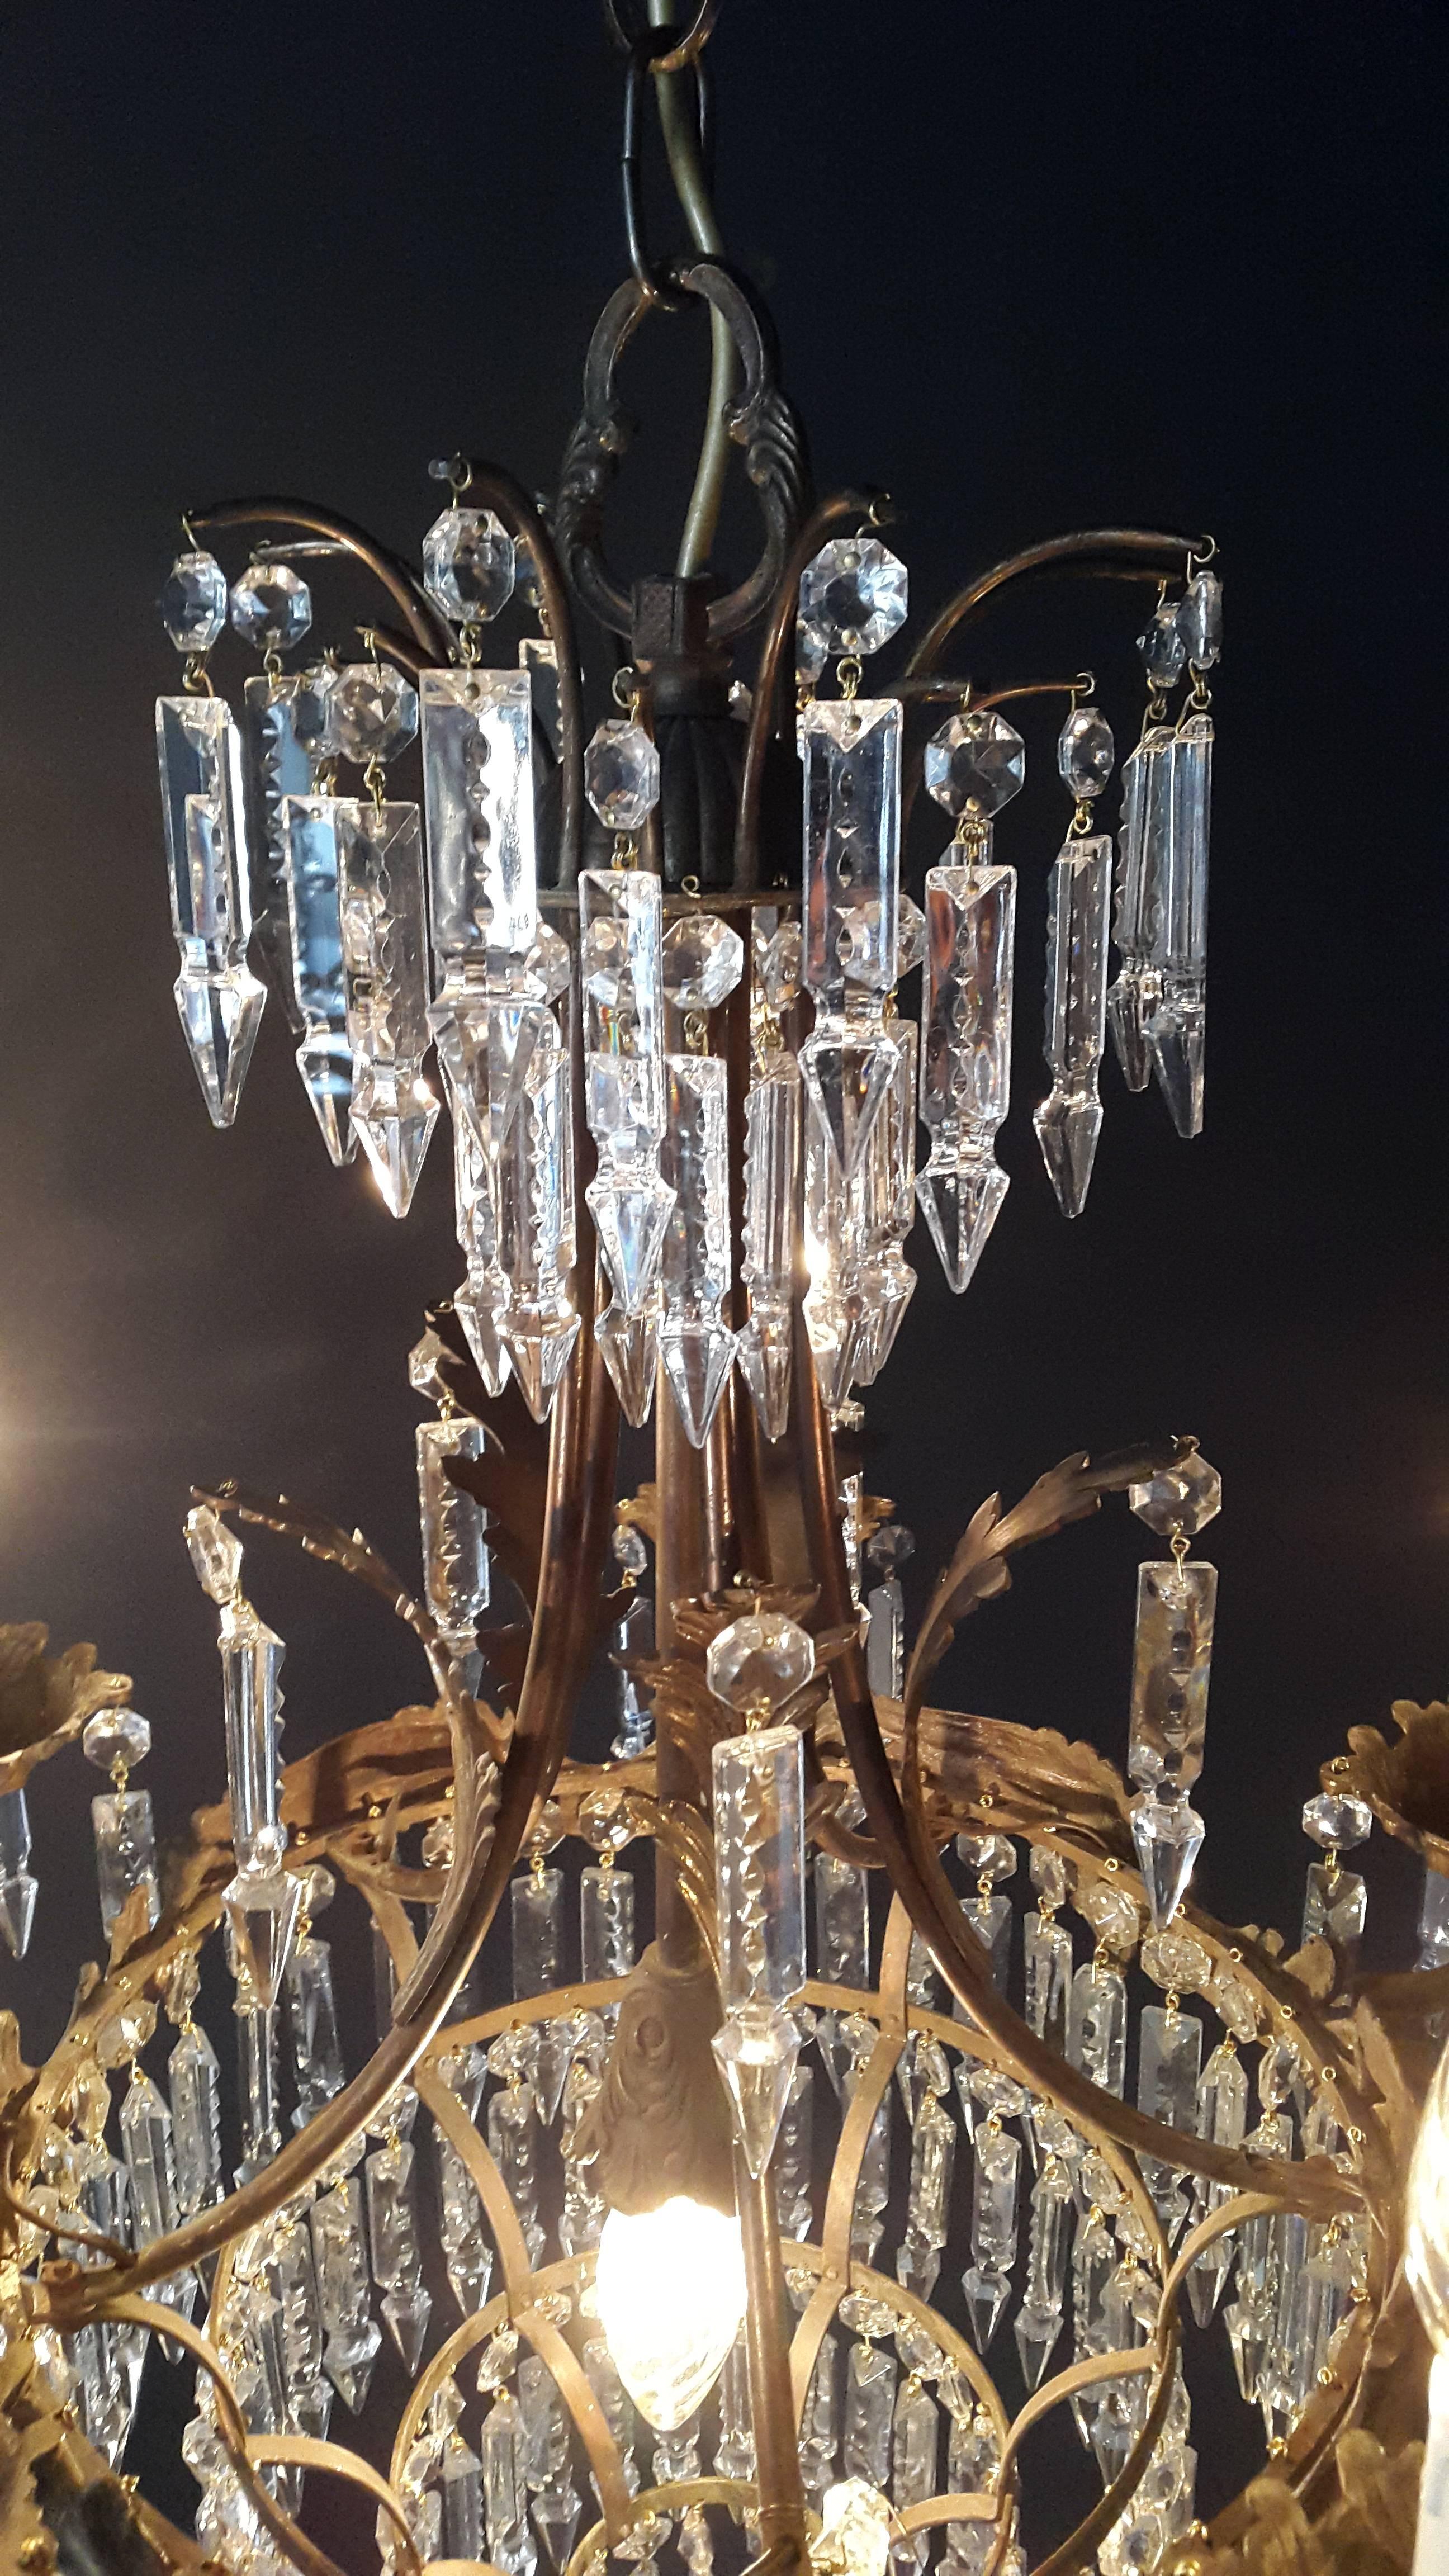 Measures: Total height: 90cm Height without chain: 70cm Diameter: 51cm Weight (approximately): 10kg

Number of lights: Six light bulb sockets: E14 Material: Brass

Crystal Chandelier Old Ceiling Lamp Brass Lustre Lights, 1940s Lamp Antique
Total